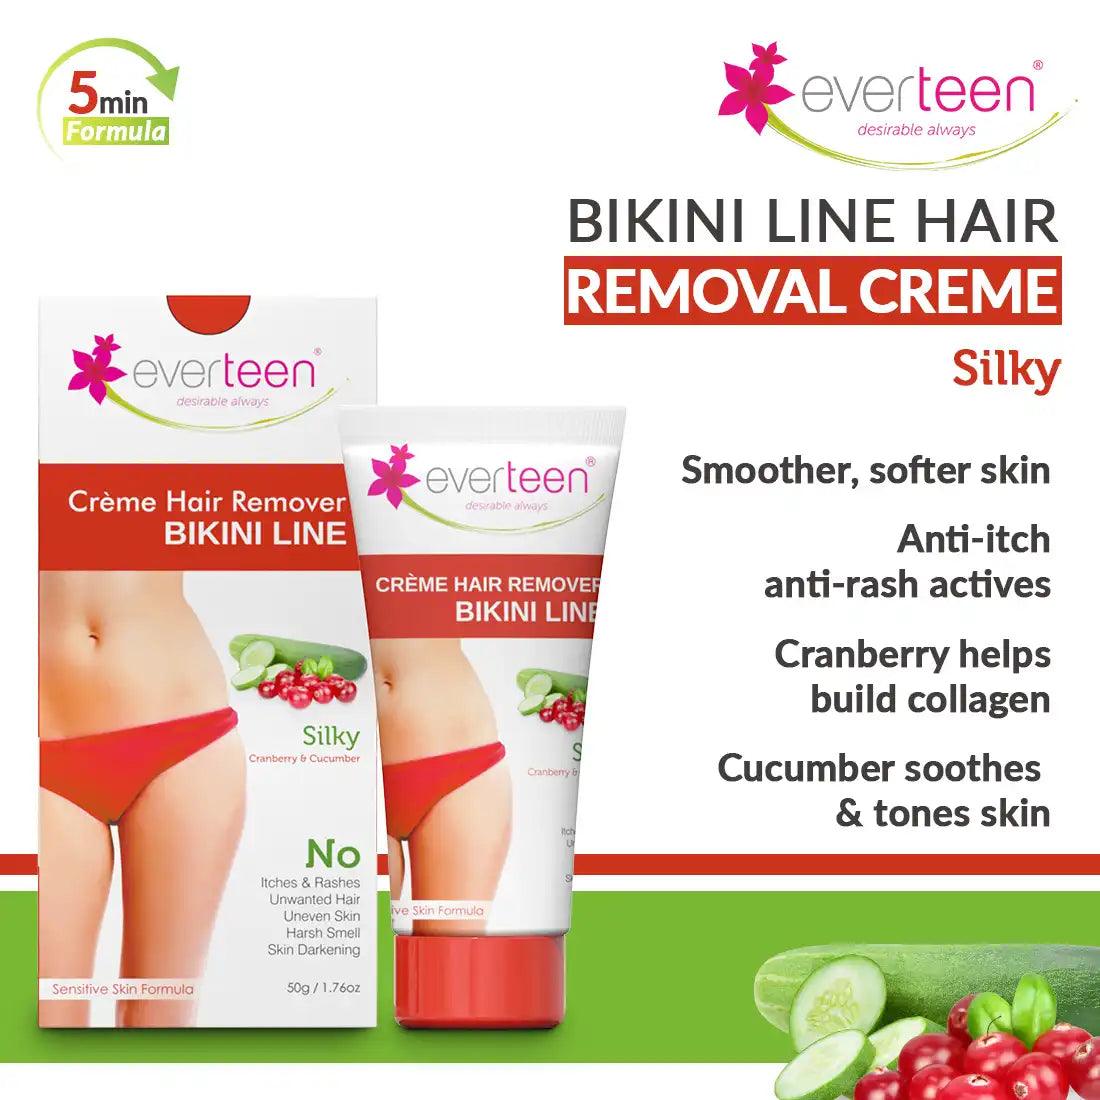 Cranberry and Cucumber in everteen Silky Bikini Line Hair Remover Creme Help Build Collagen and Tone Skin - everteen-neud.com